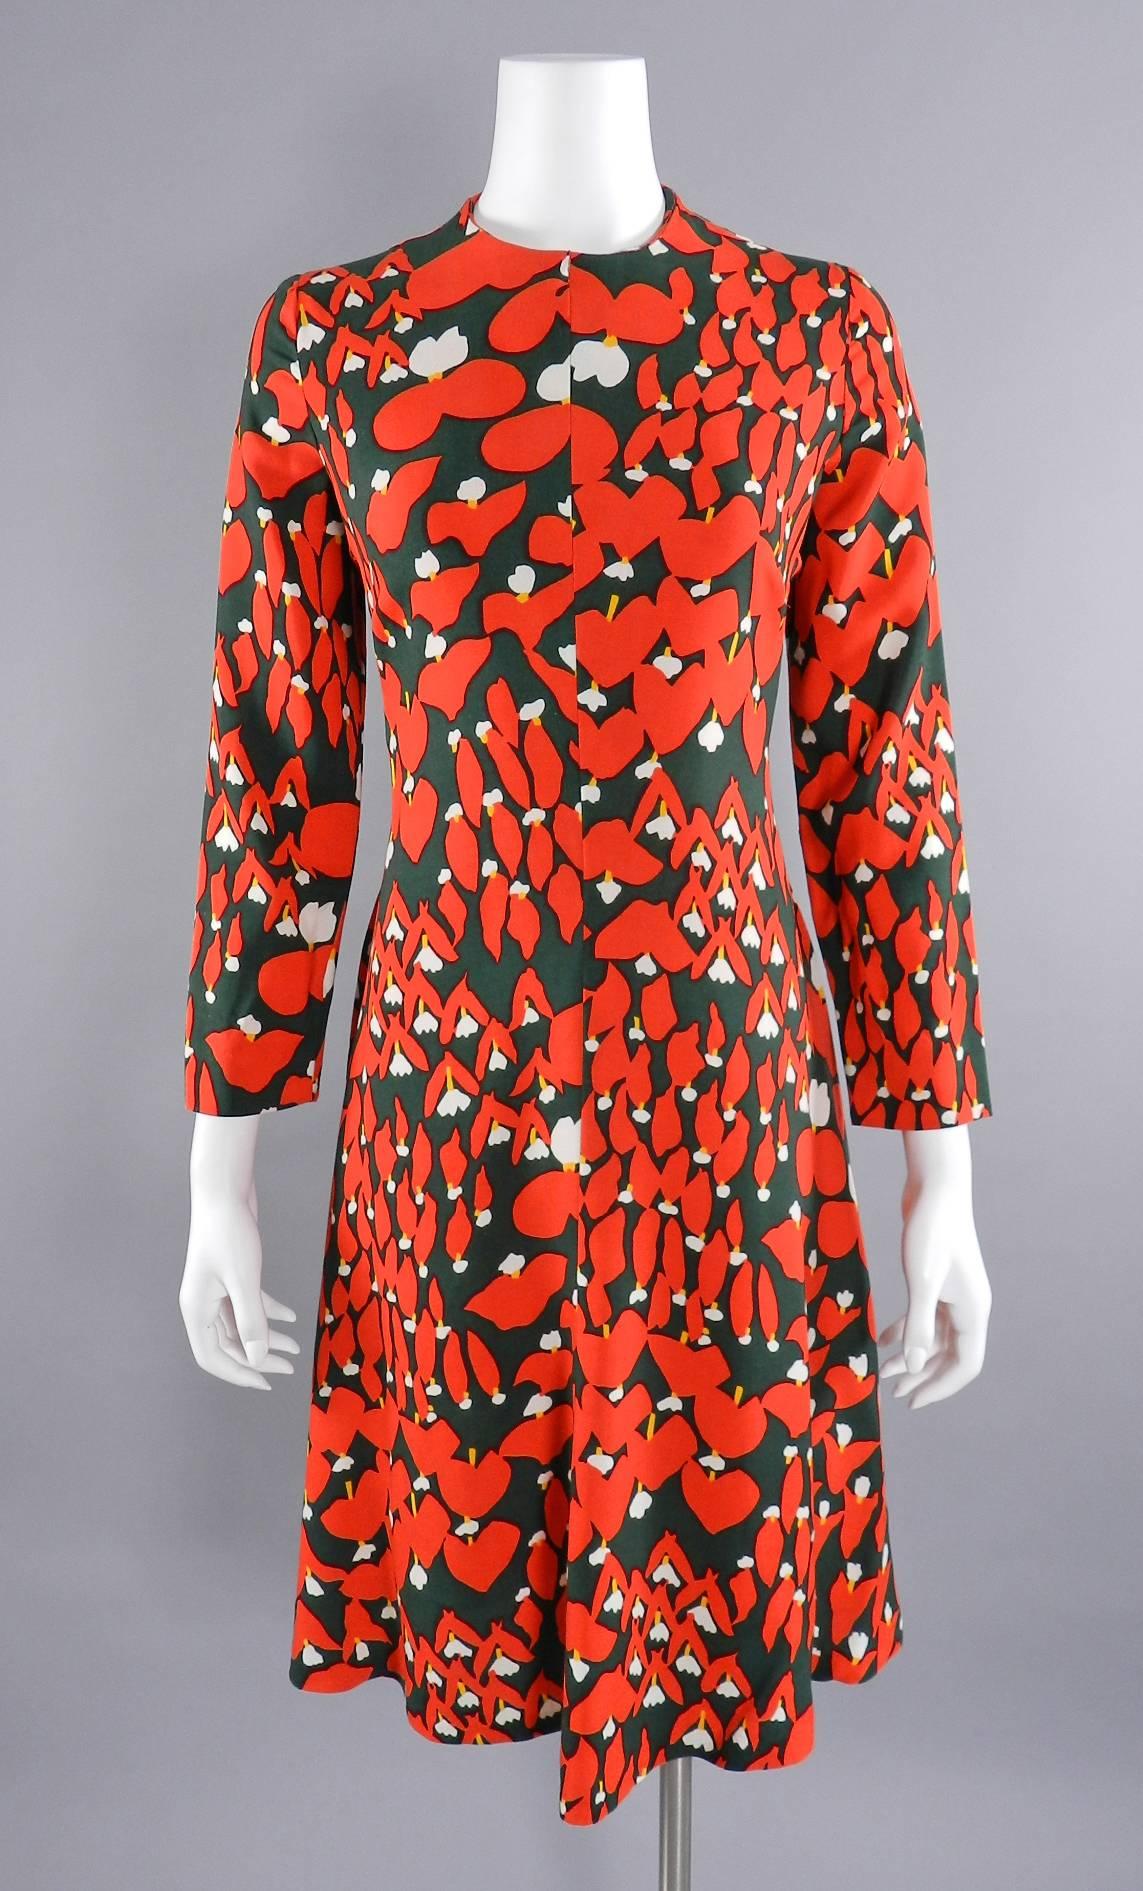 Geoffrey Beene Vintage 1970's Red and Green Dress 5